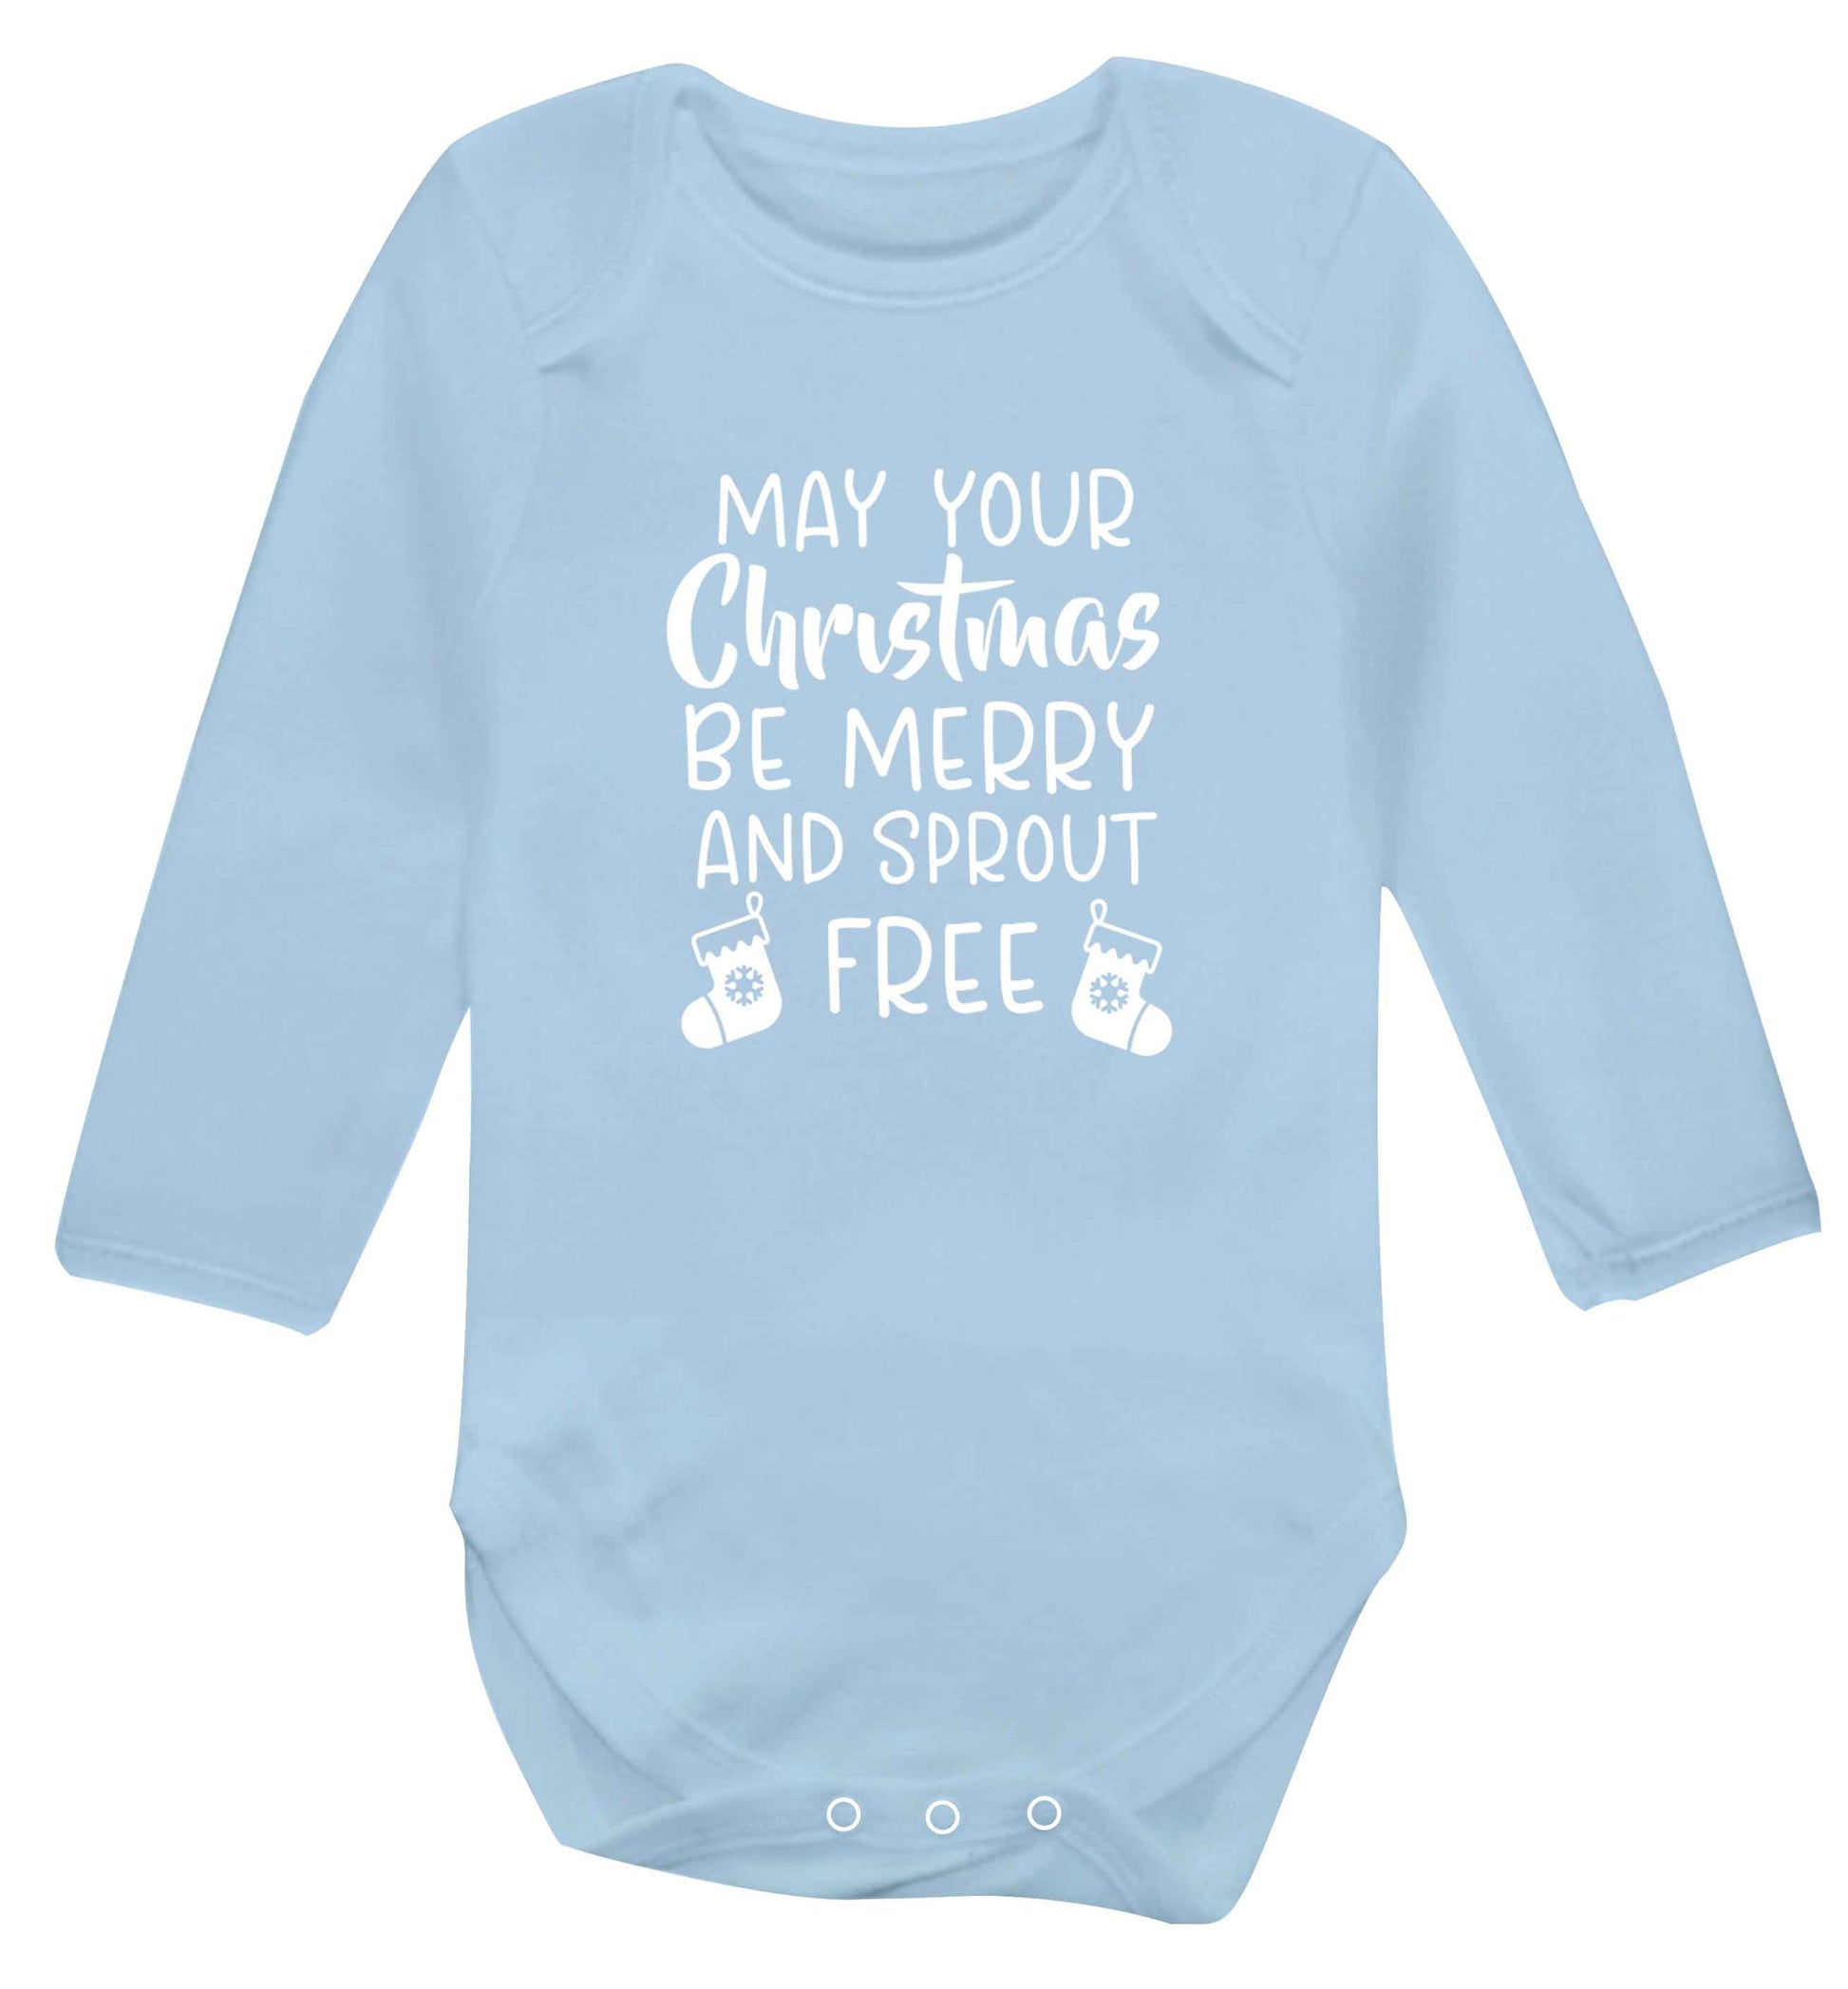 May your Christmas be merry and sprout free baby vest long sleeved pale blue 6-12 months